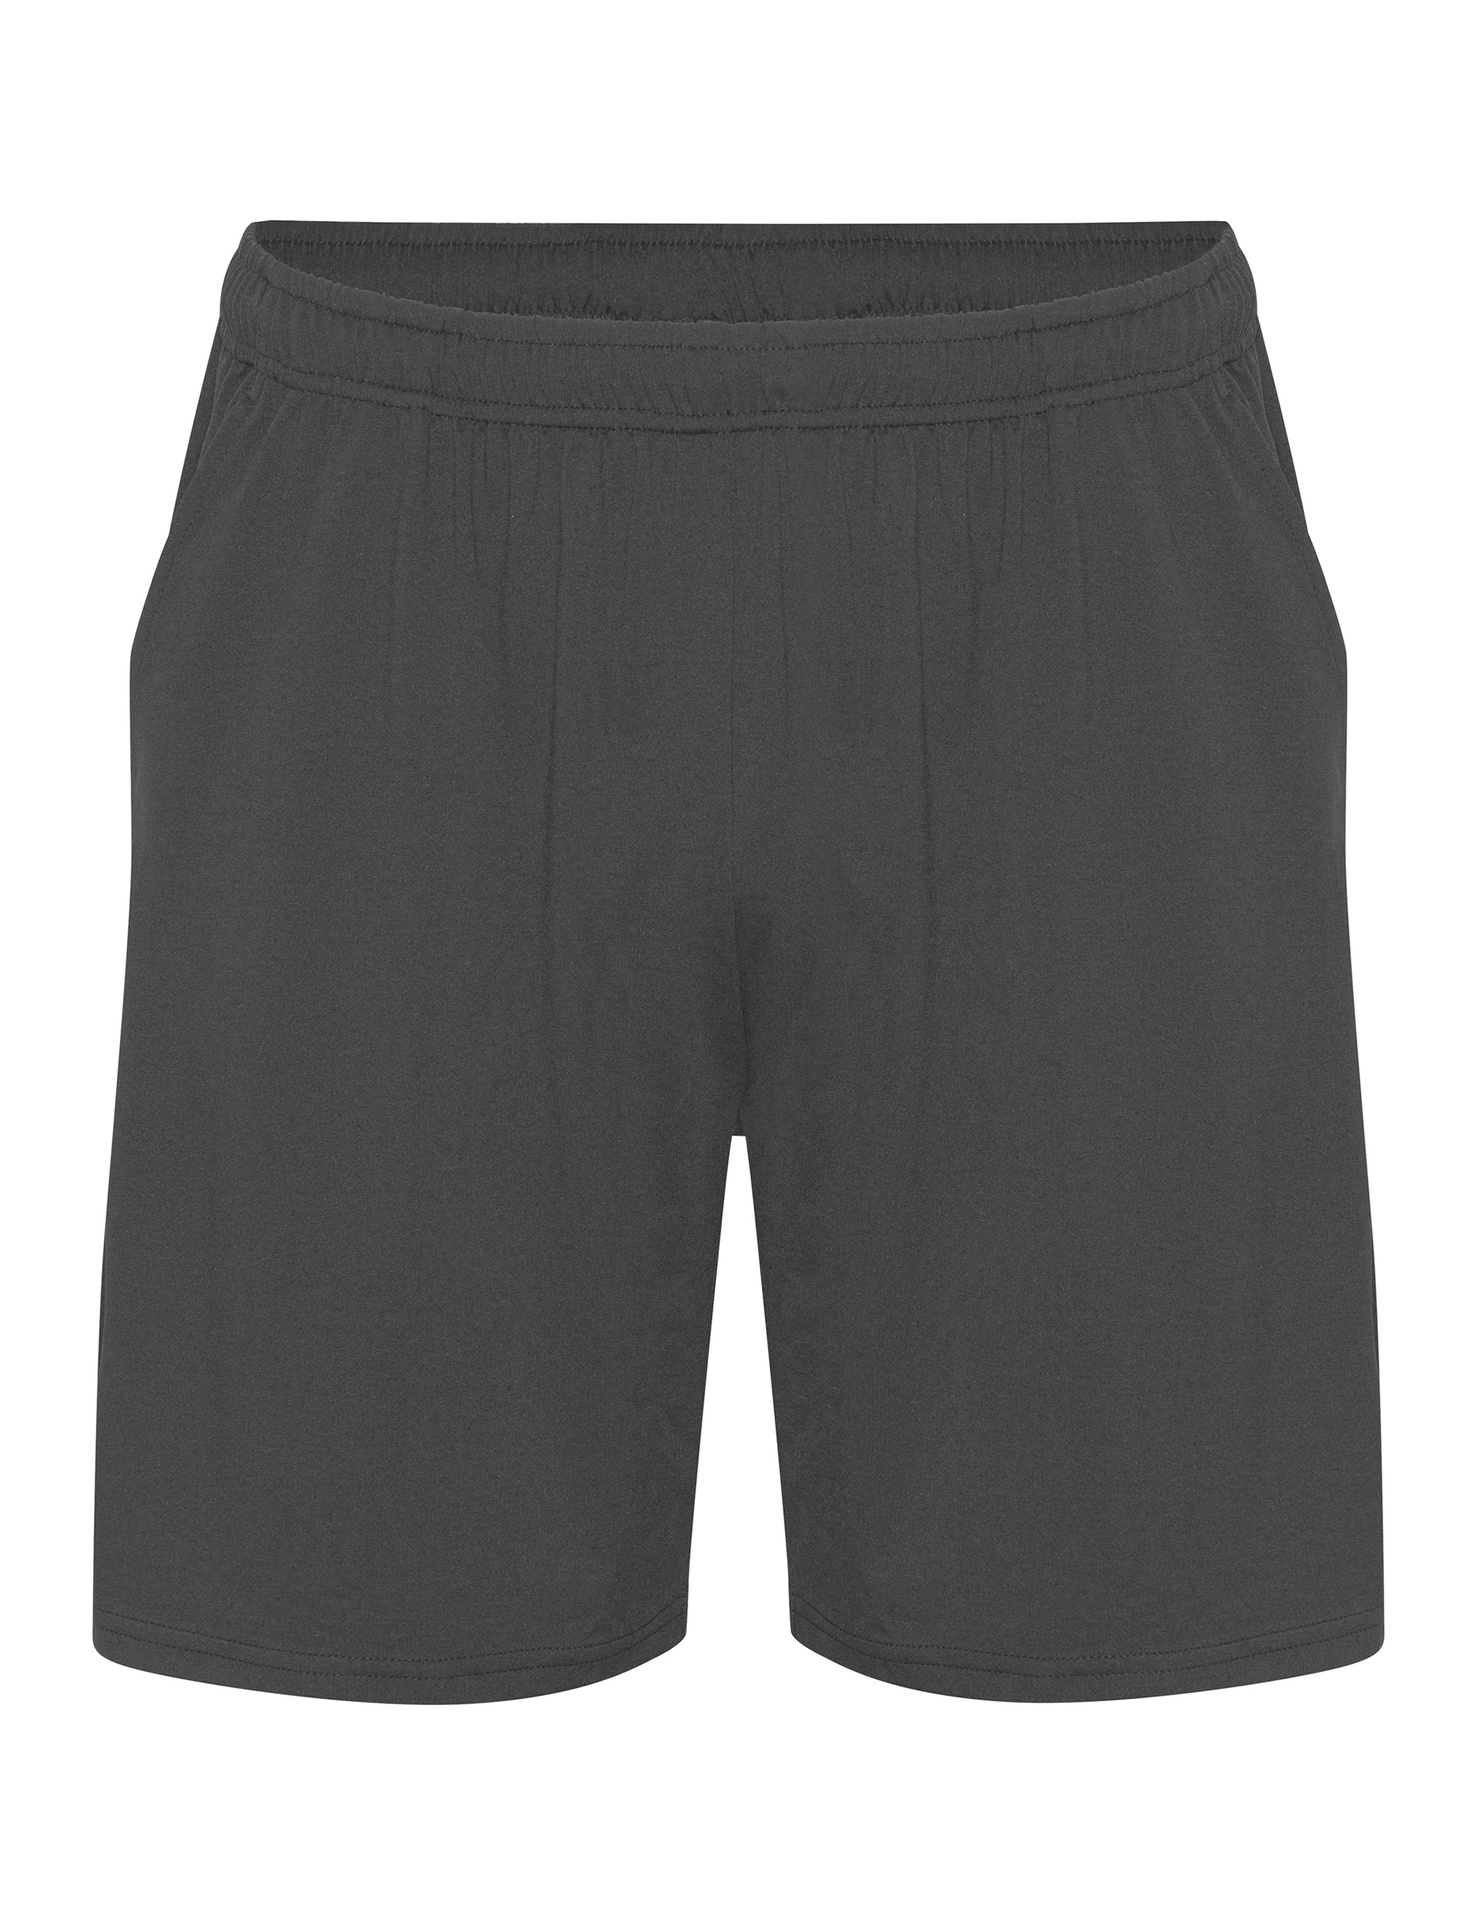 [PR/03876] Unisex Recycled Performance Shorts (Charcoal 06, 3XL)